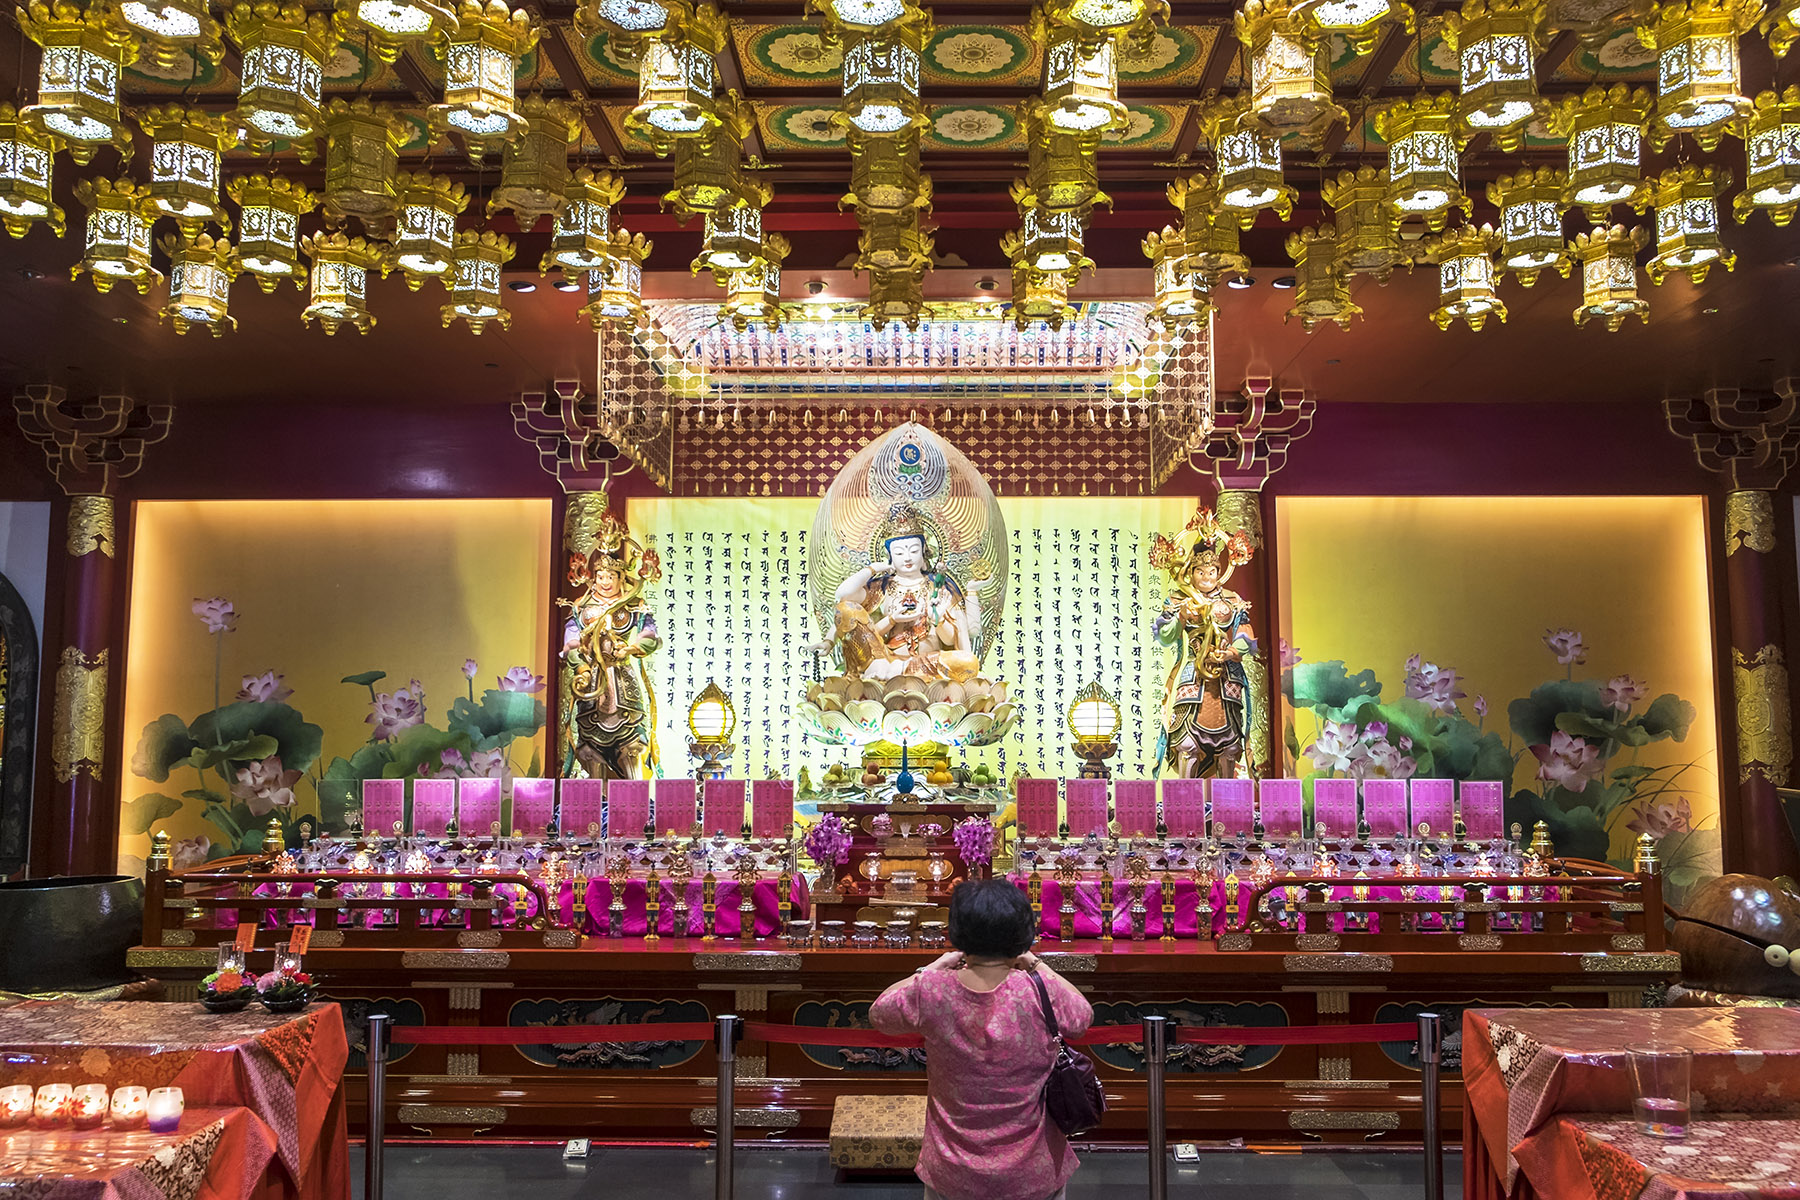 Woman worshipping in front of a brightly adorned altar at Buddha Tooth Relic Temple in Singapore.